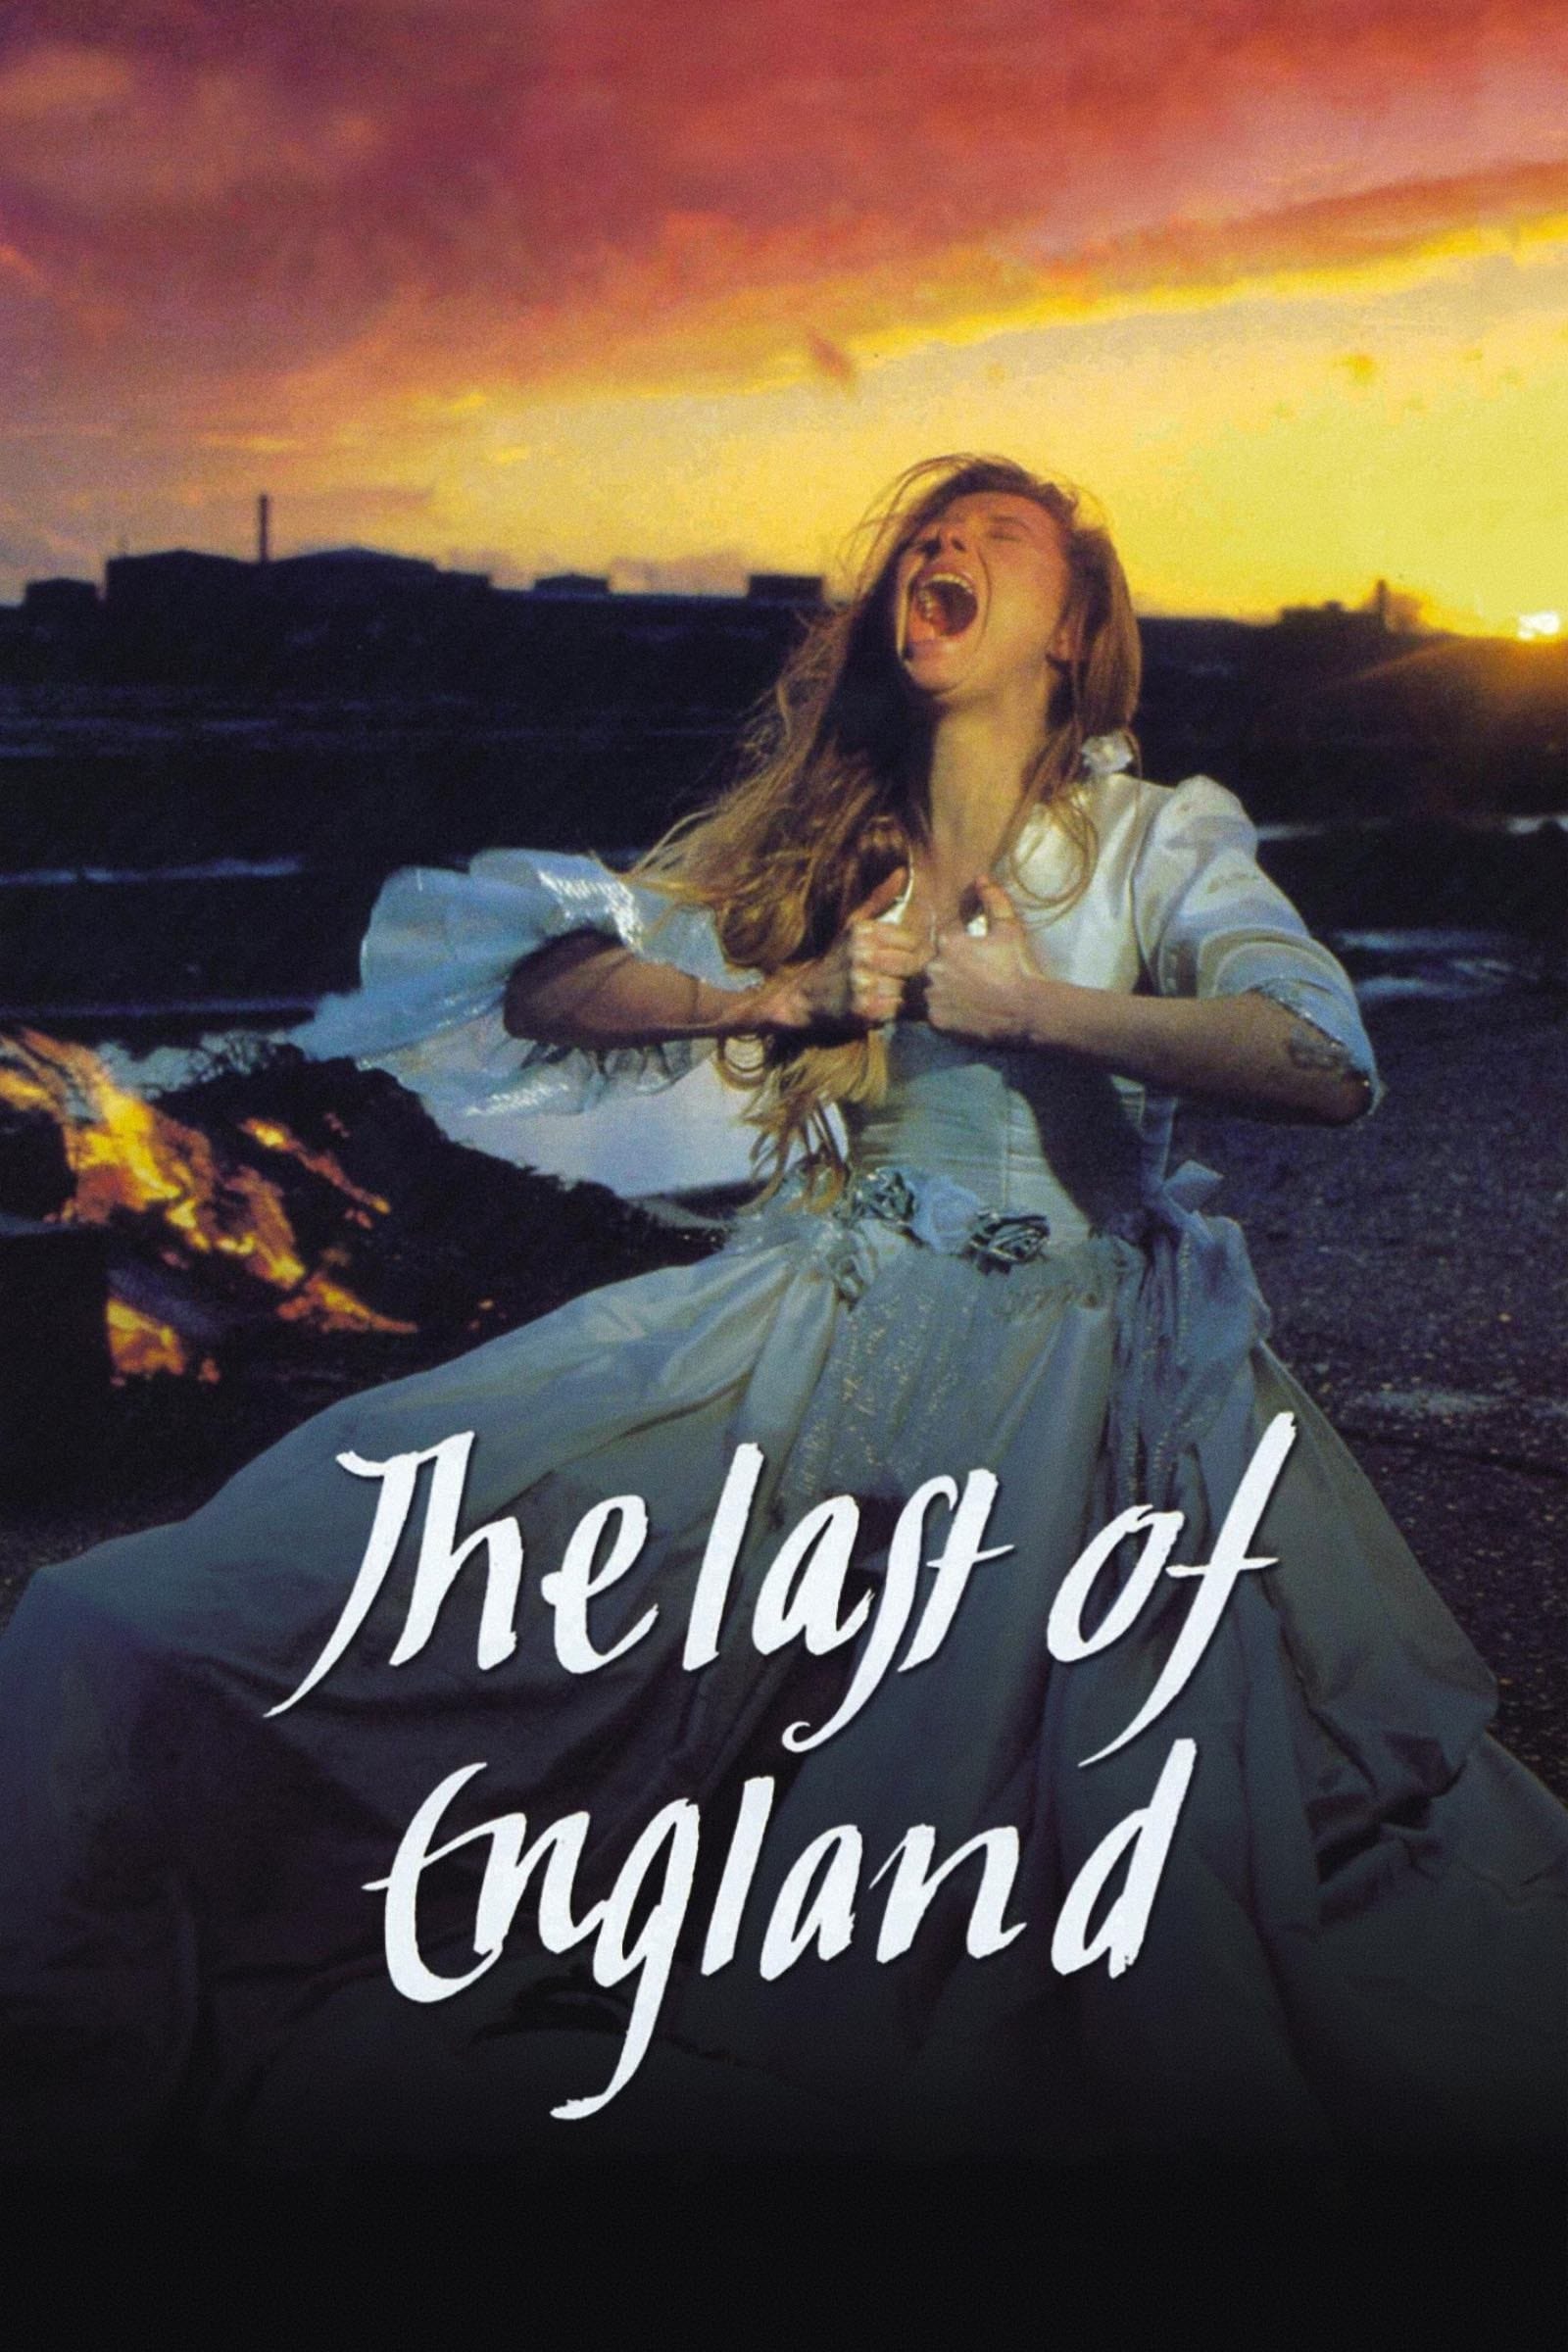 The Last of England (1989)